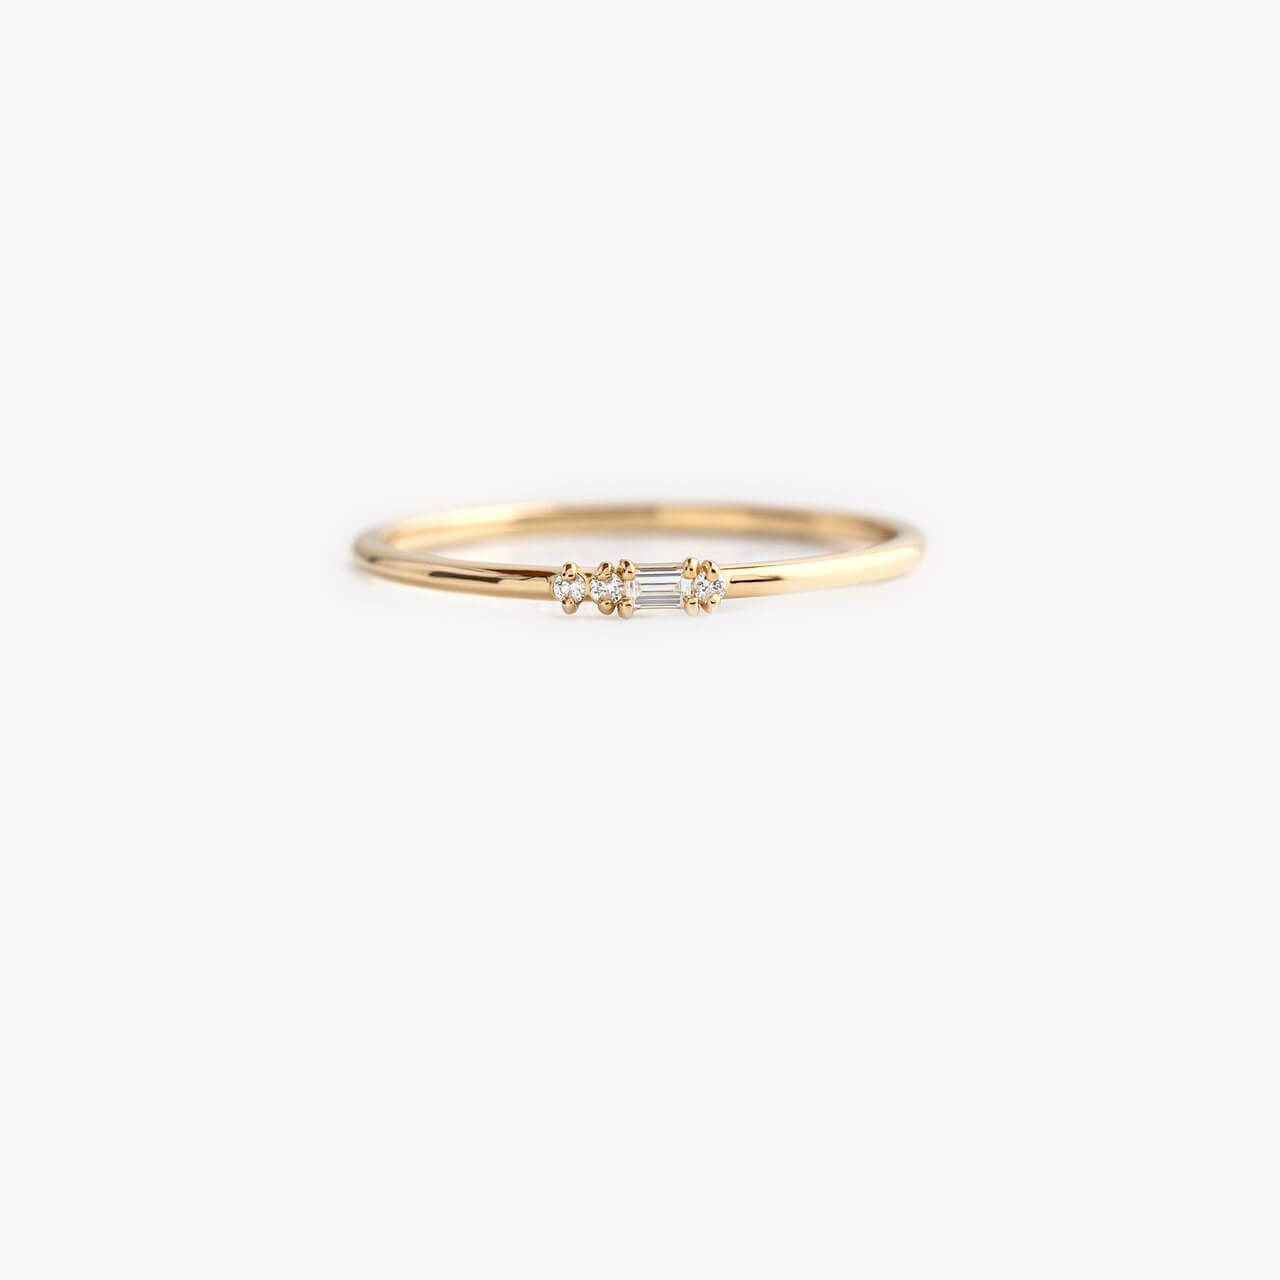 Morse Code Ring, Yellow Gold - Letter "F"